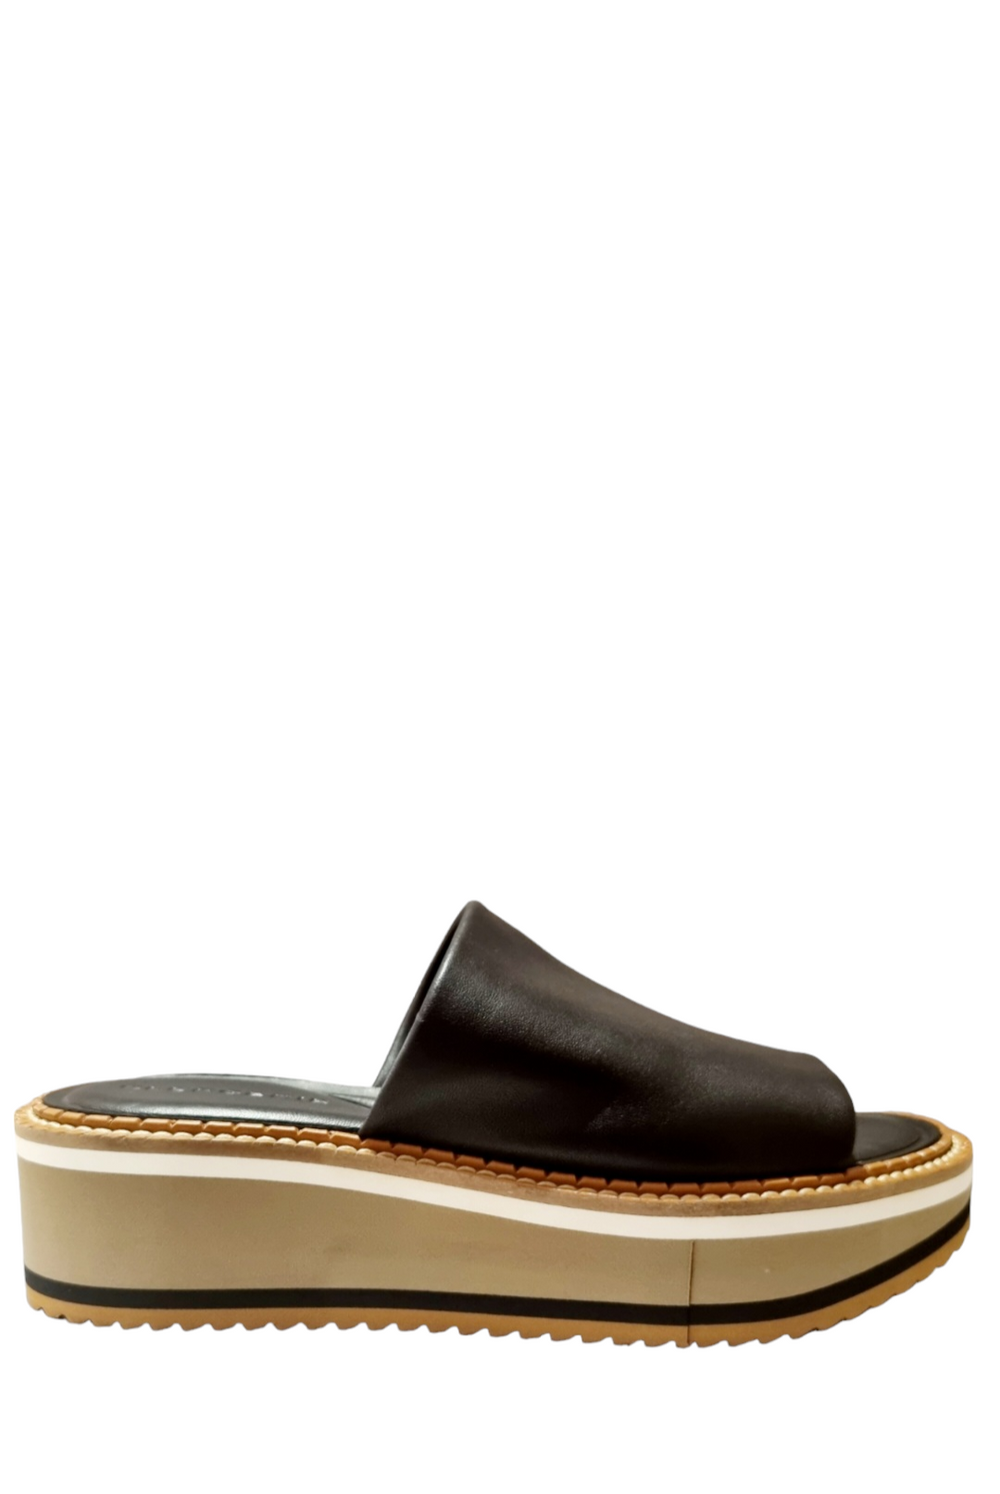 Fast Black/ Nude  Slip-On Mules - Clergerie - Liberty Shoes Australia